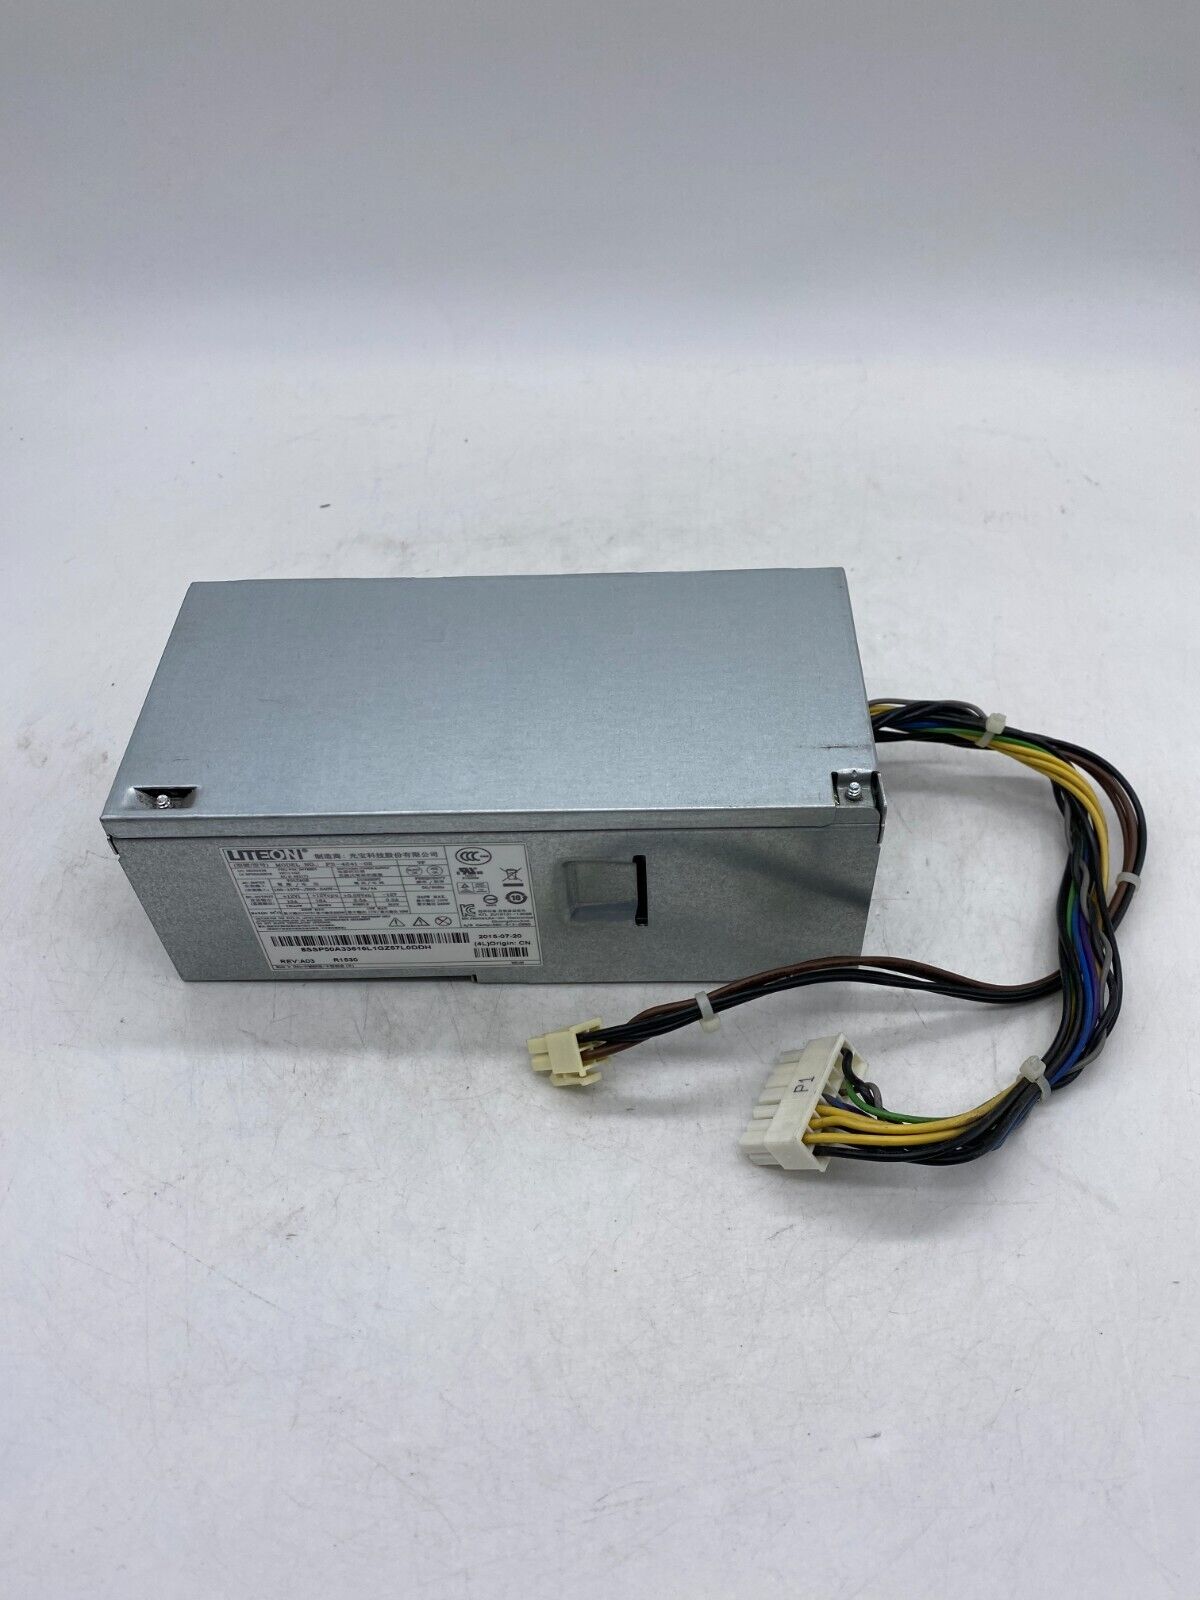 LiteOn PS-4241-02 Power Supply 240W 54Y8901